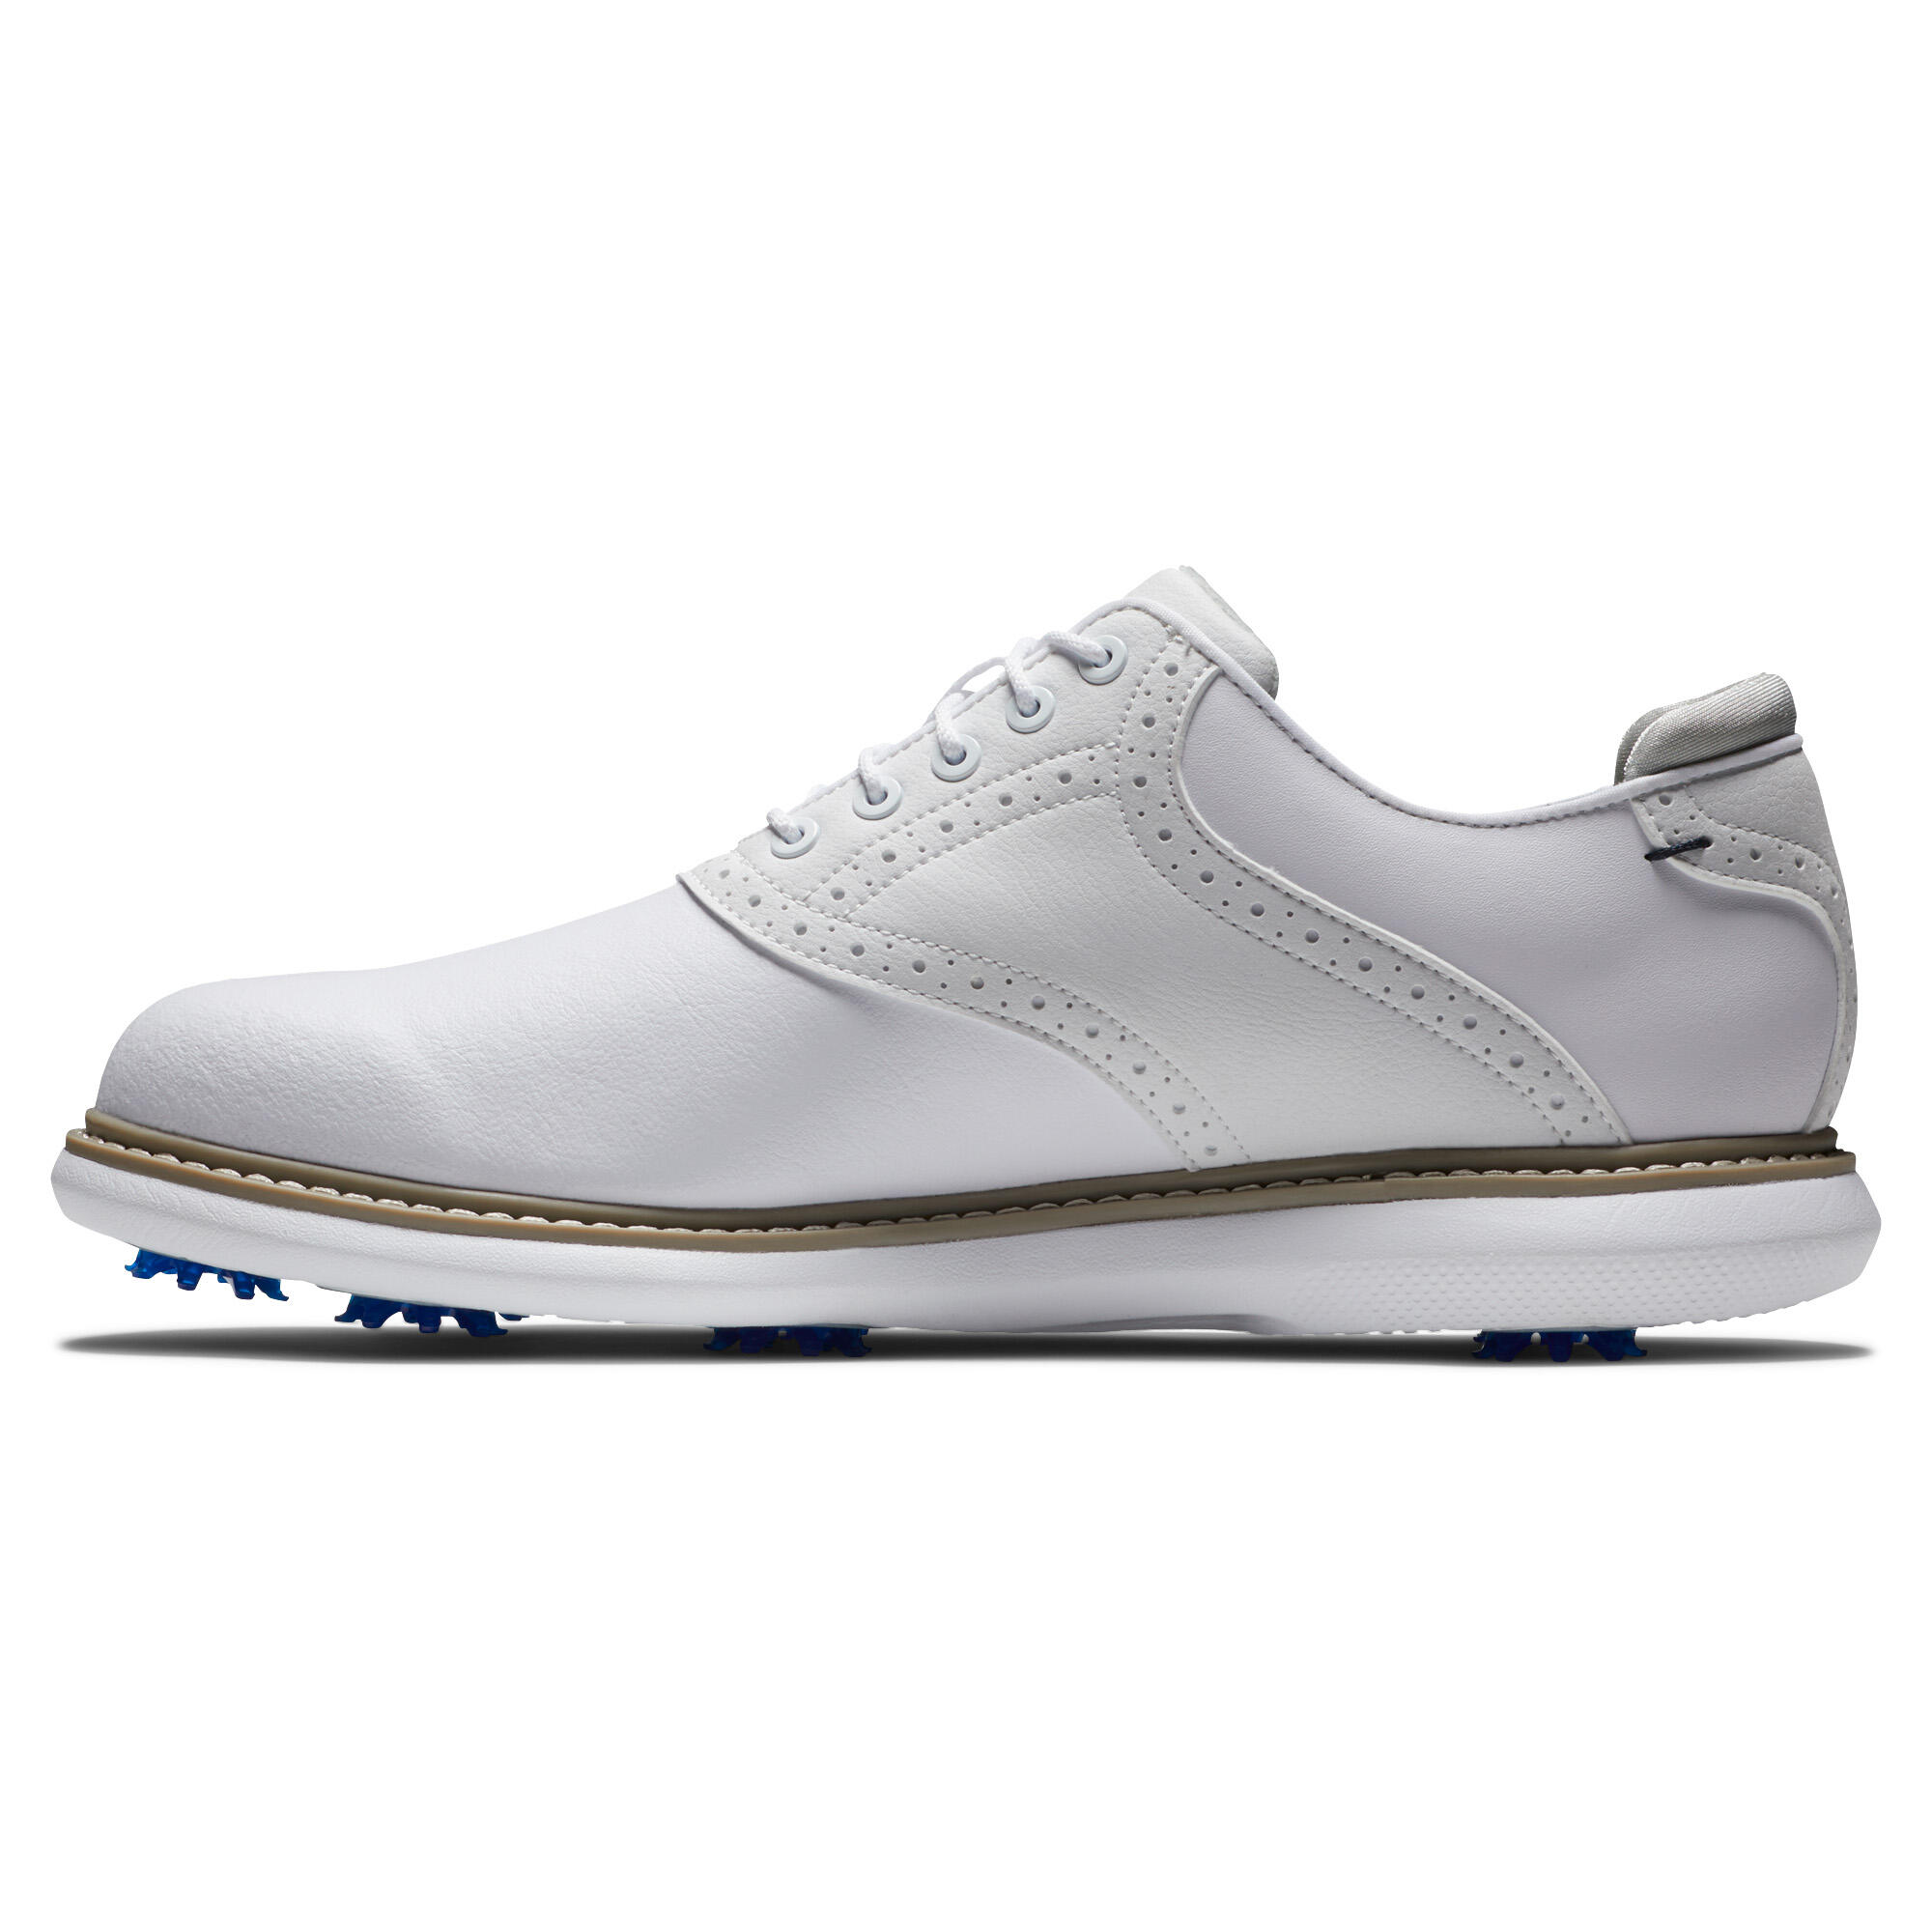 MEN'S GOLF SHOES FOOTJOY WATERPROOF - TRADITIONS WHITE 3/6